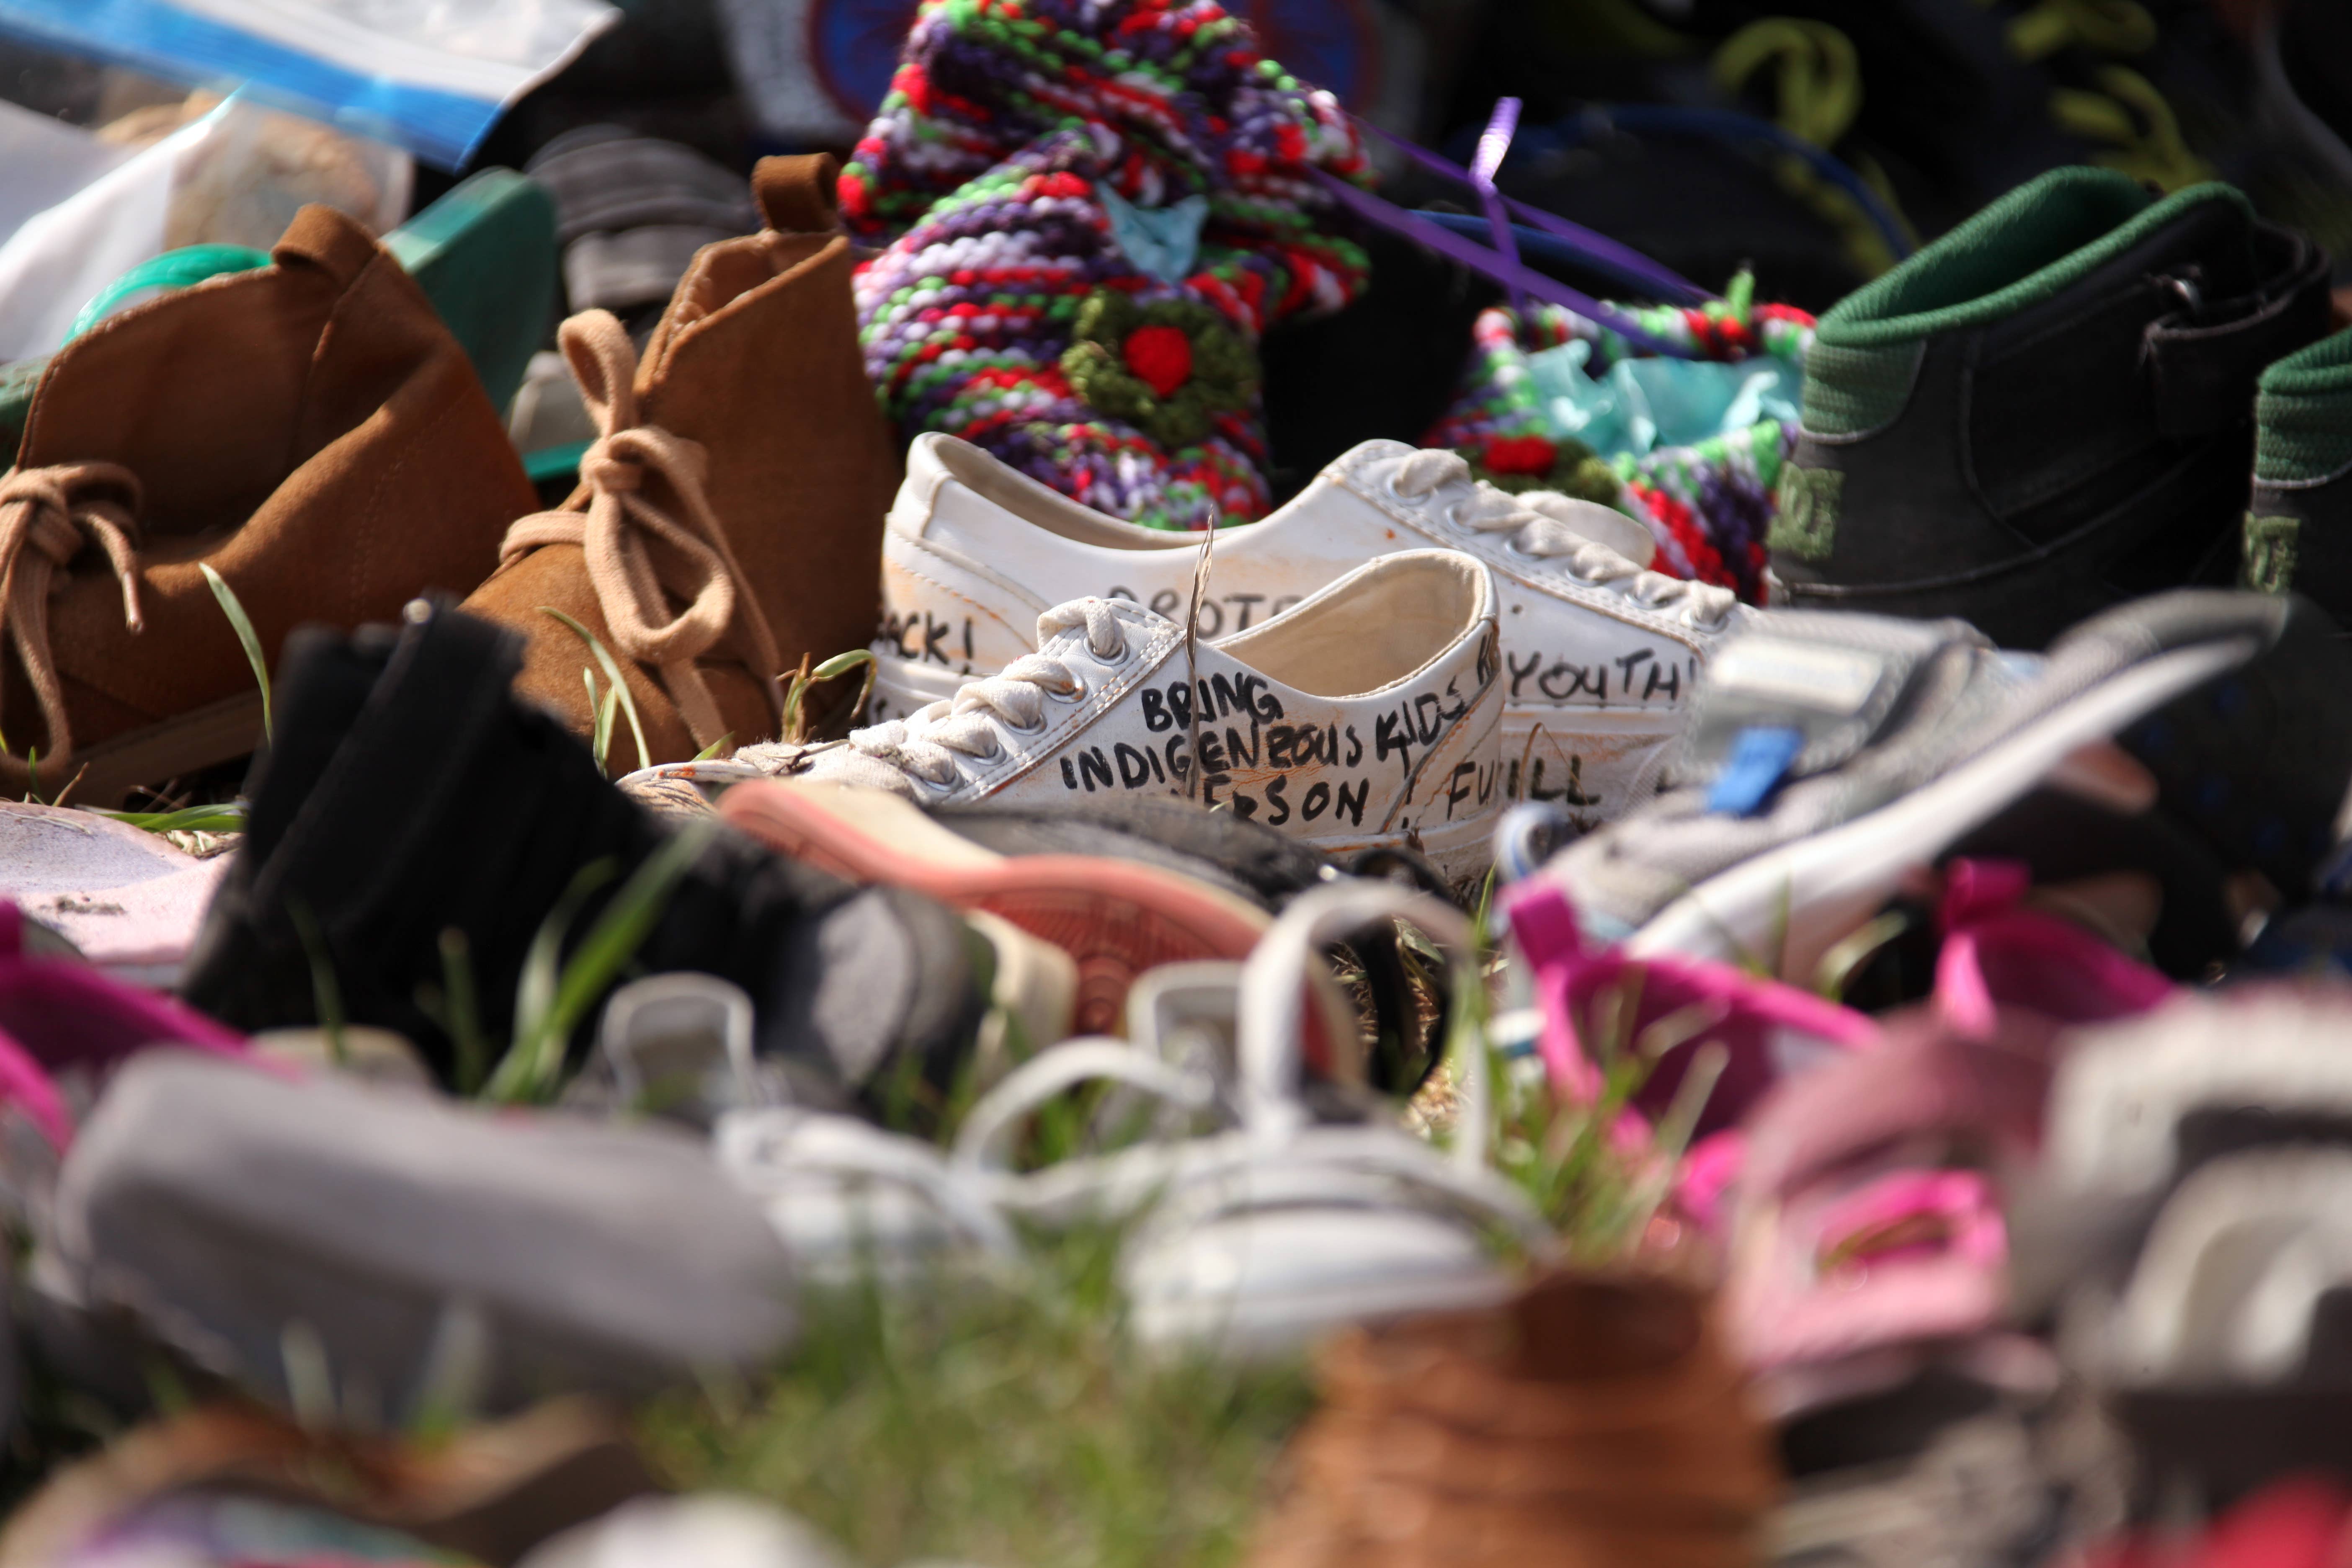 Shoes are placed at Ryerson Univerisity to mourn 215 indigenous children whose remains were discovered at a former residential school on June 7, 2021 in Toronto, Canada.